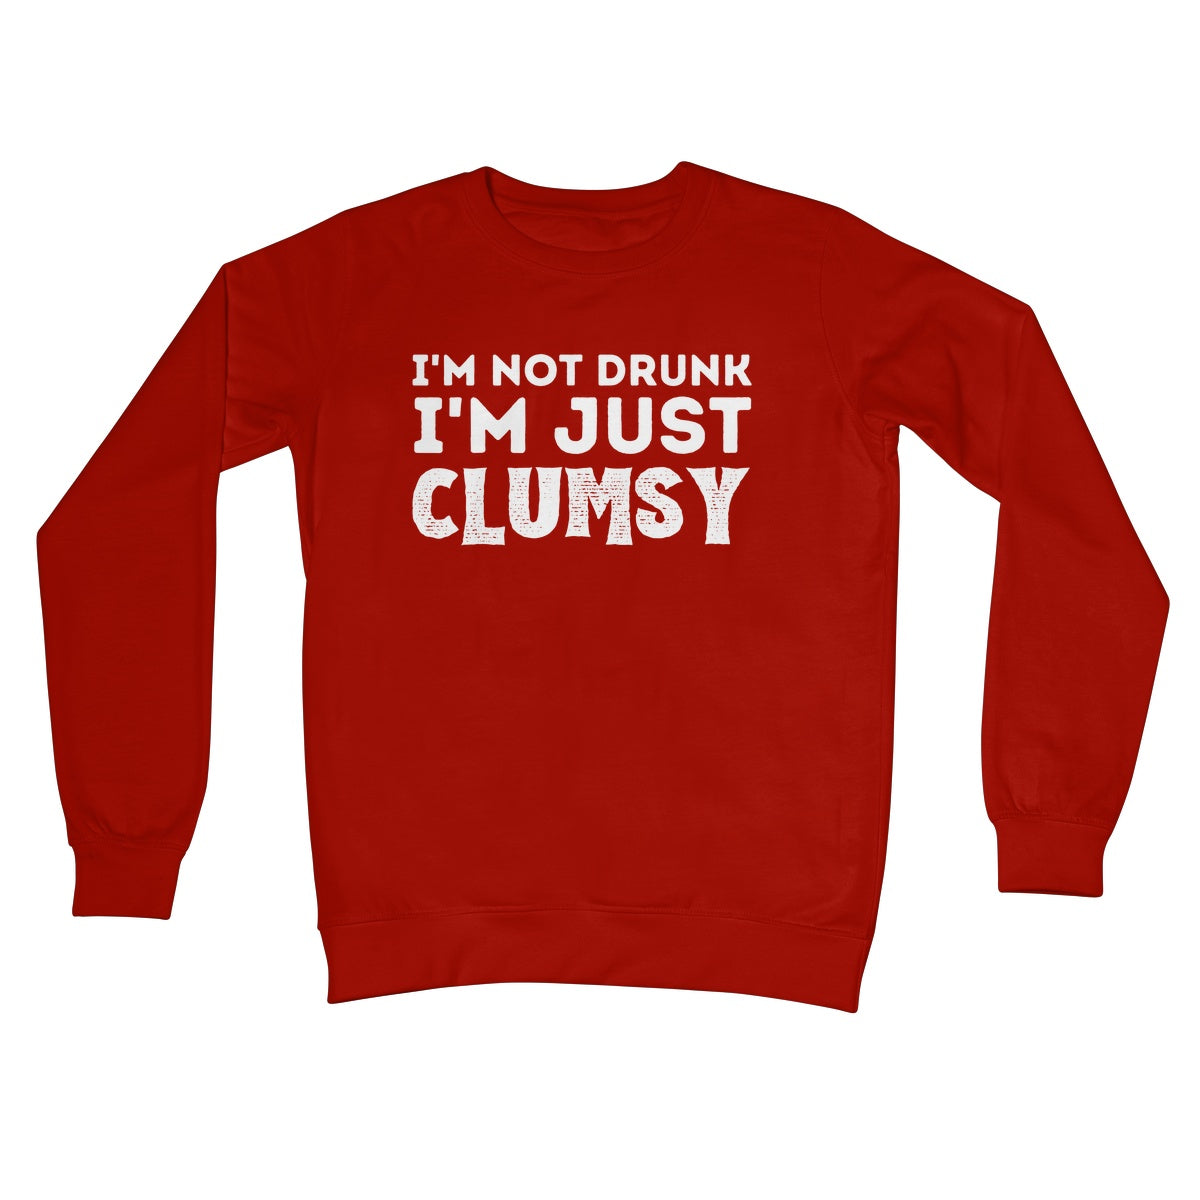 I'm not drunk I'm just clumsy jumper red